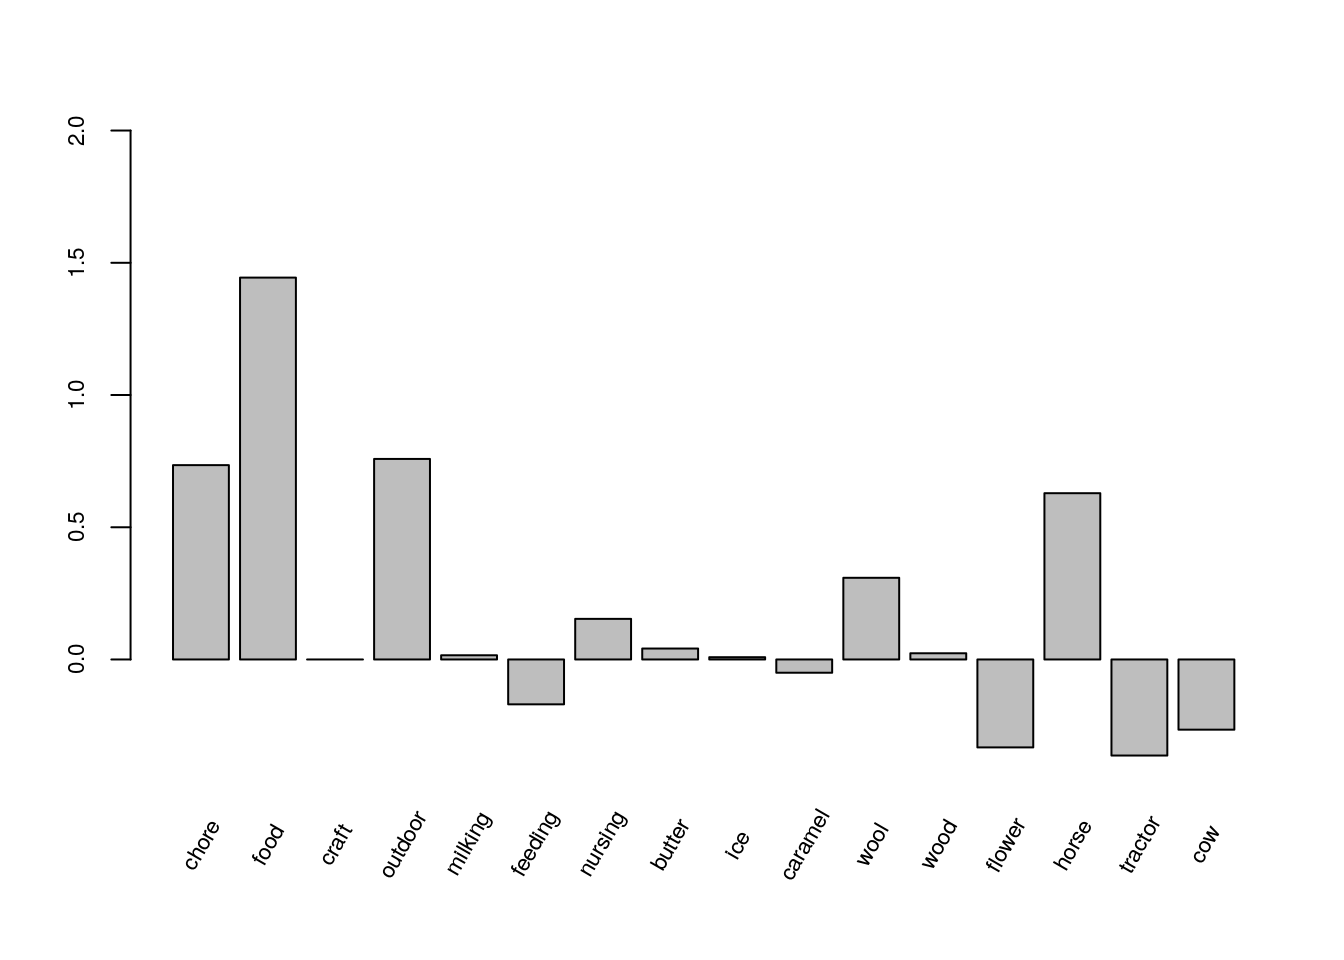 Bar plot of the estimated coefficients of the attribute and attribute-level variables for the paired model.